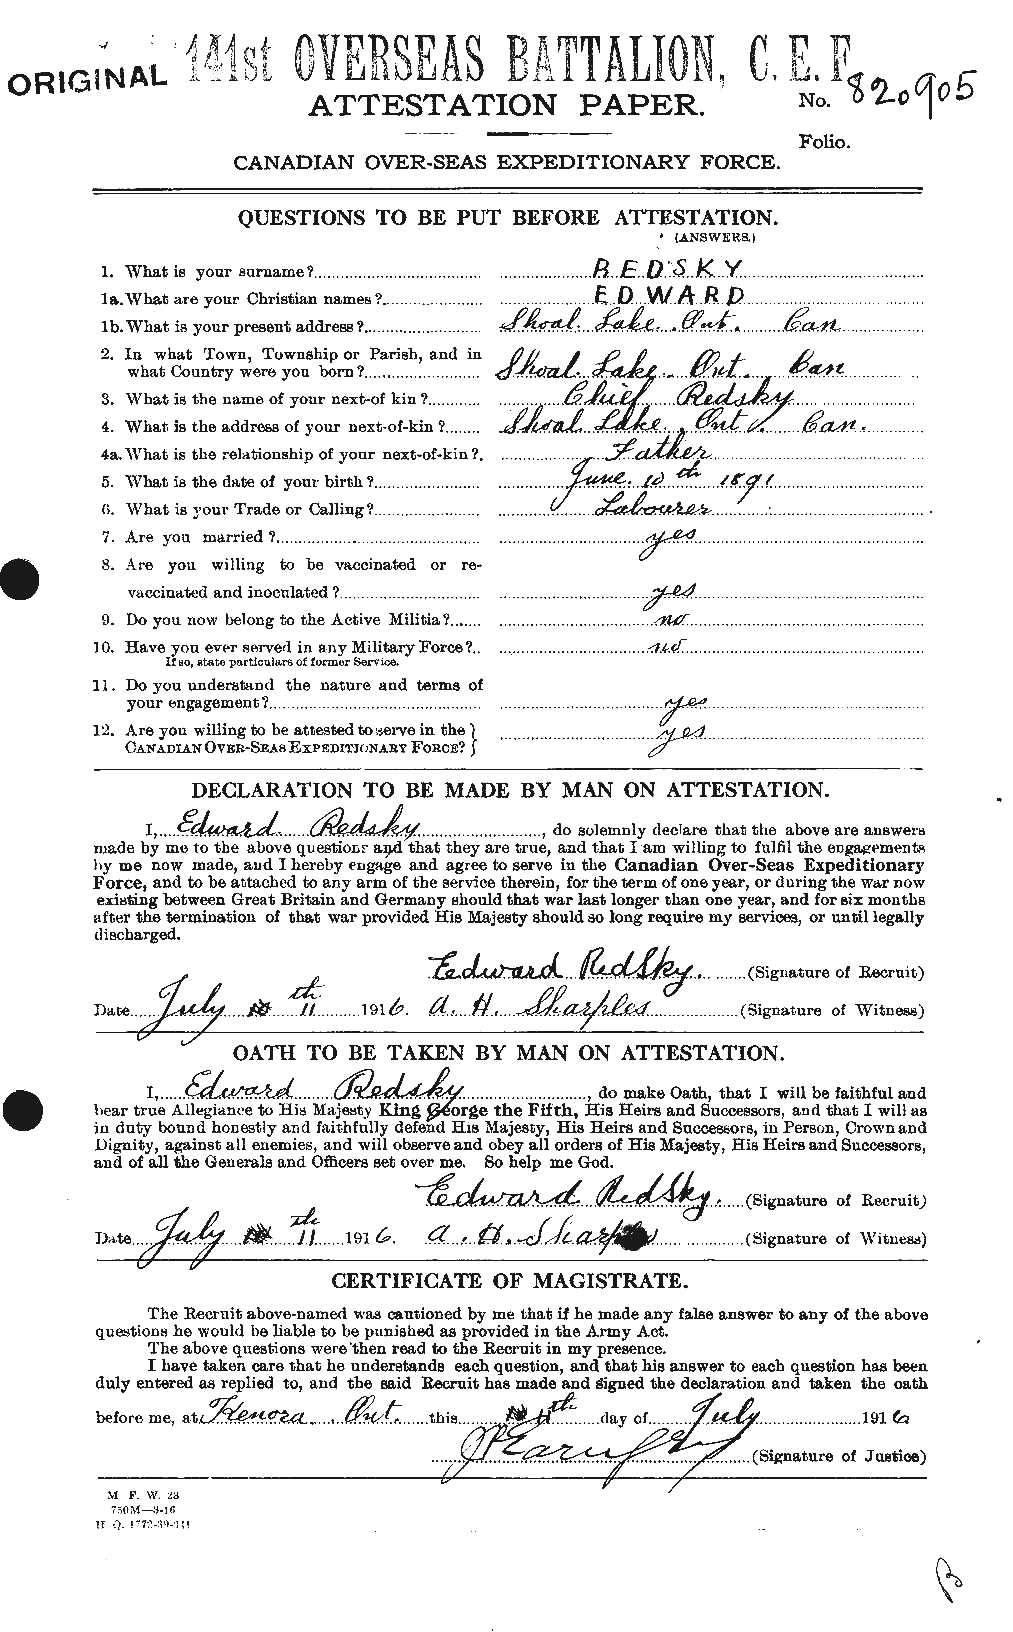 Personnel Records of the First World War - CEF 596193a